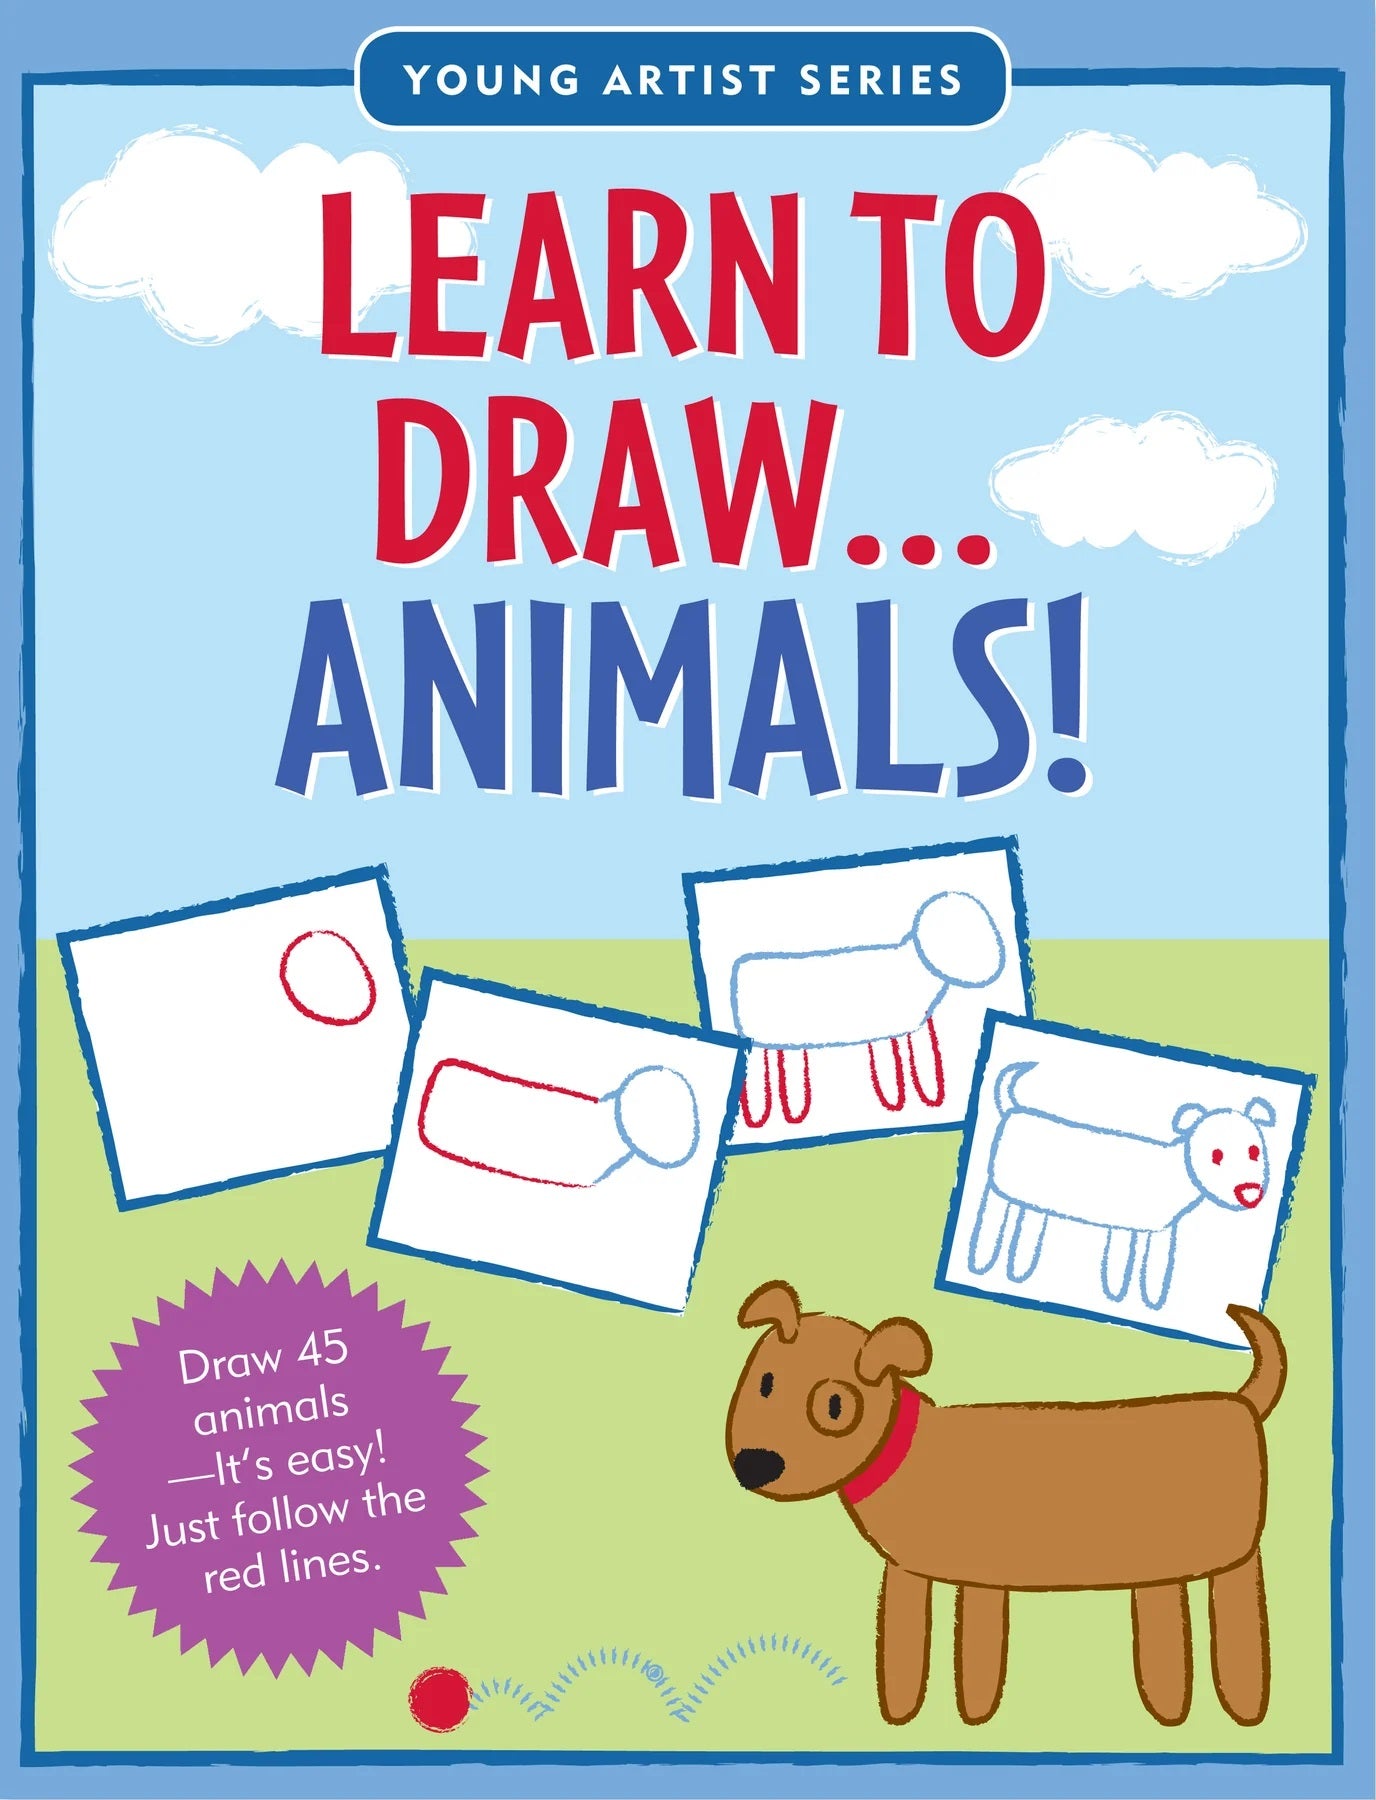 Learn to Draw Animals